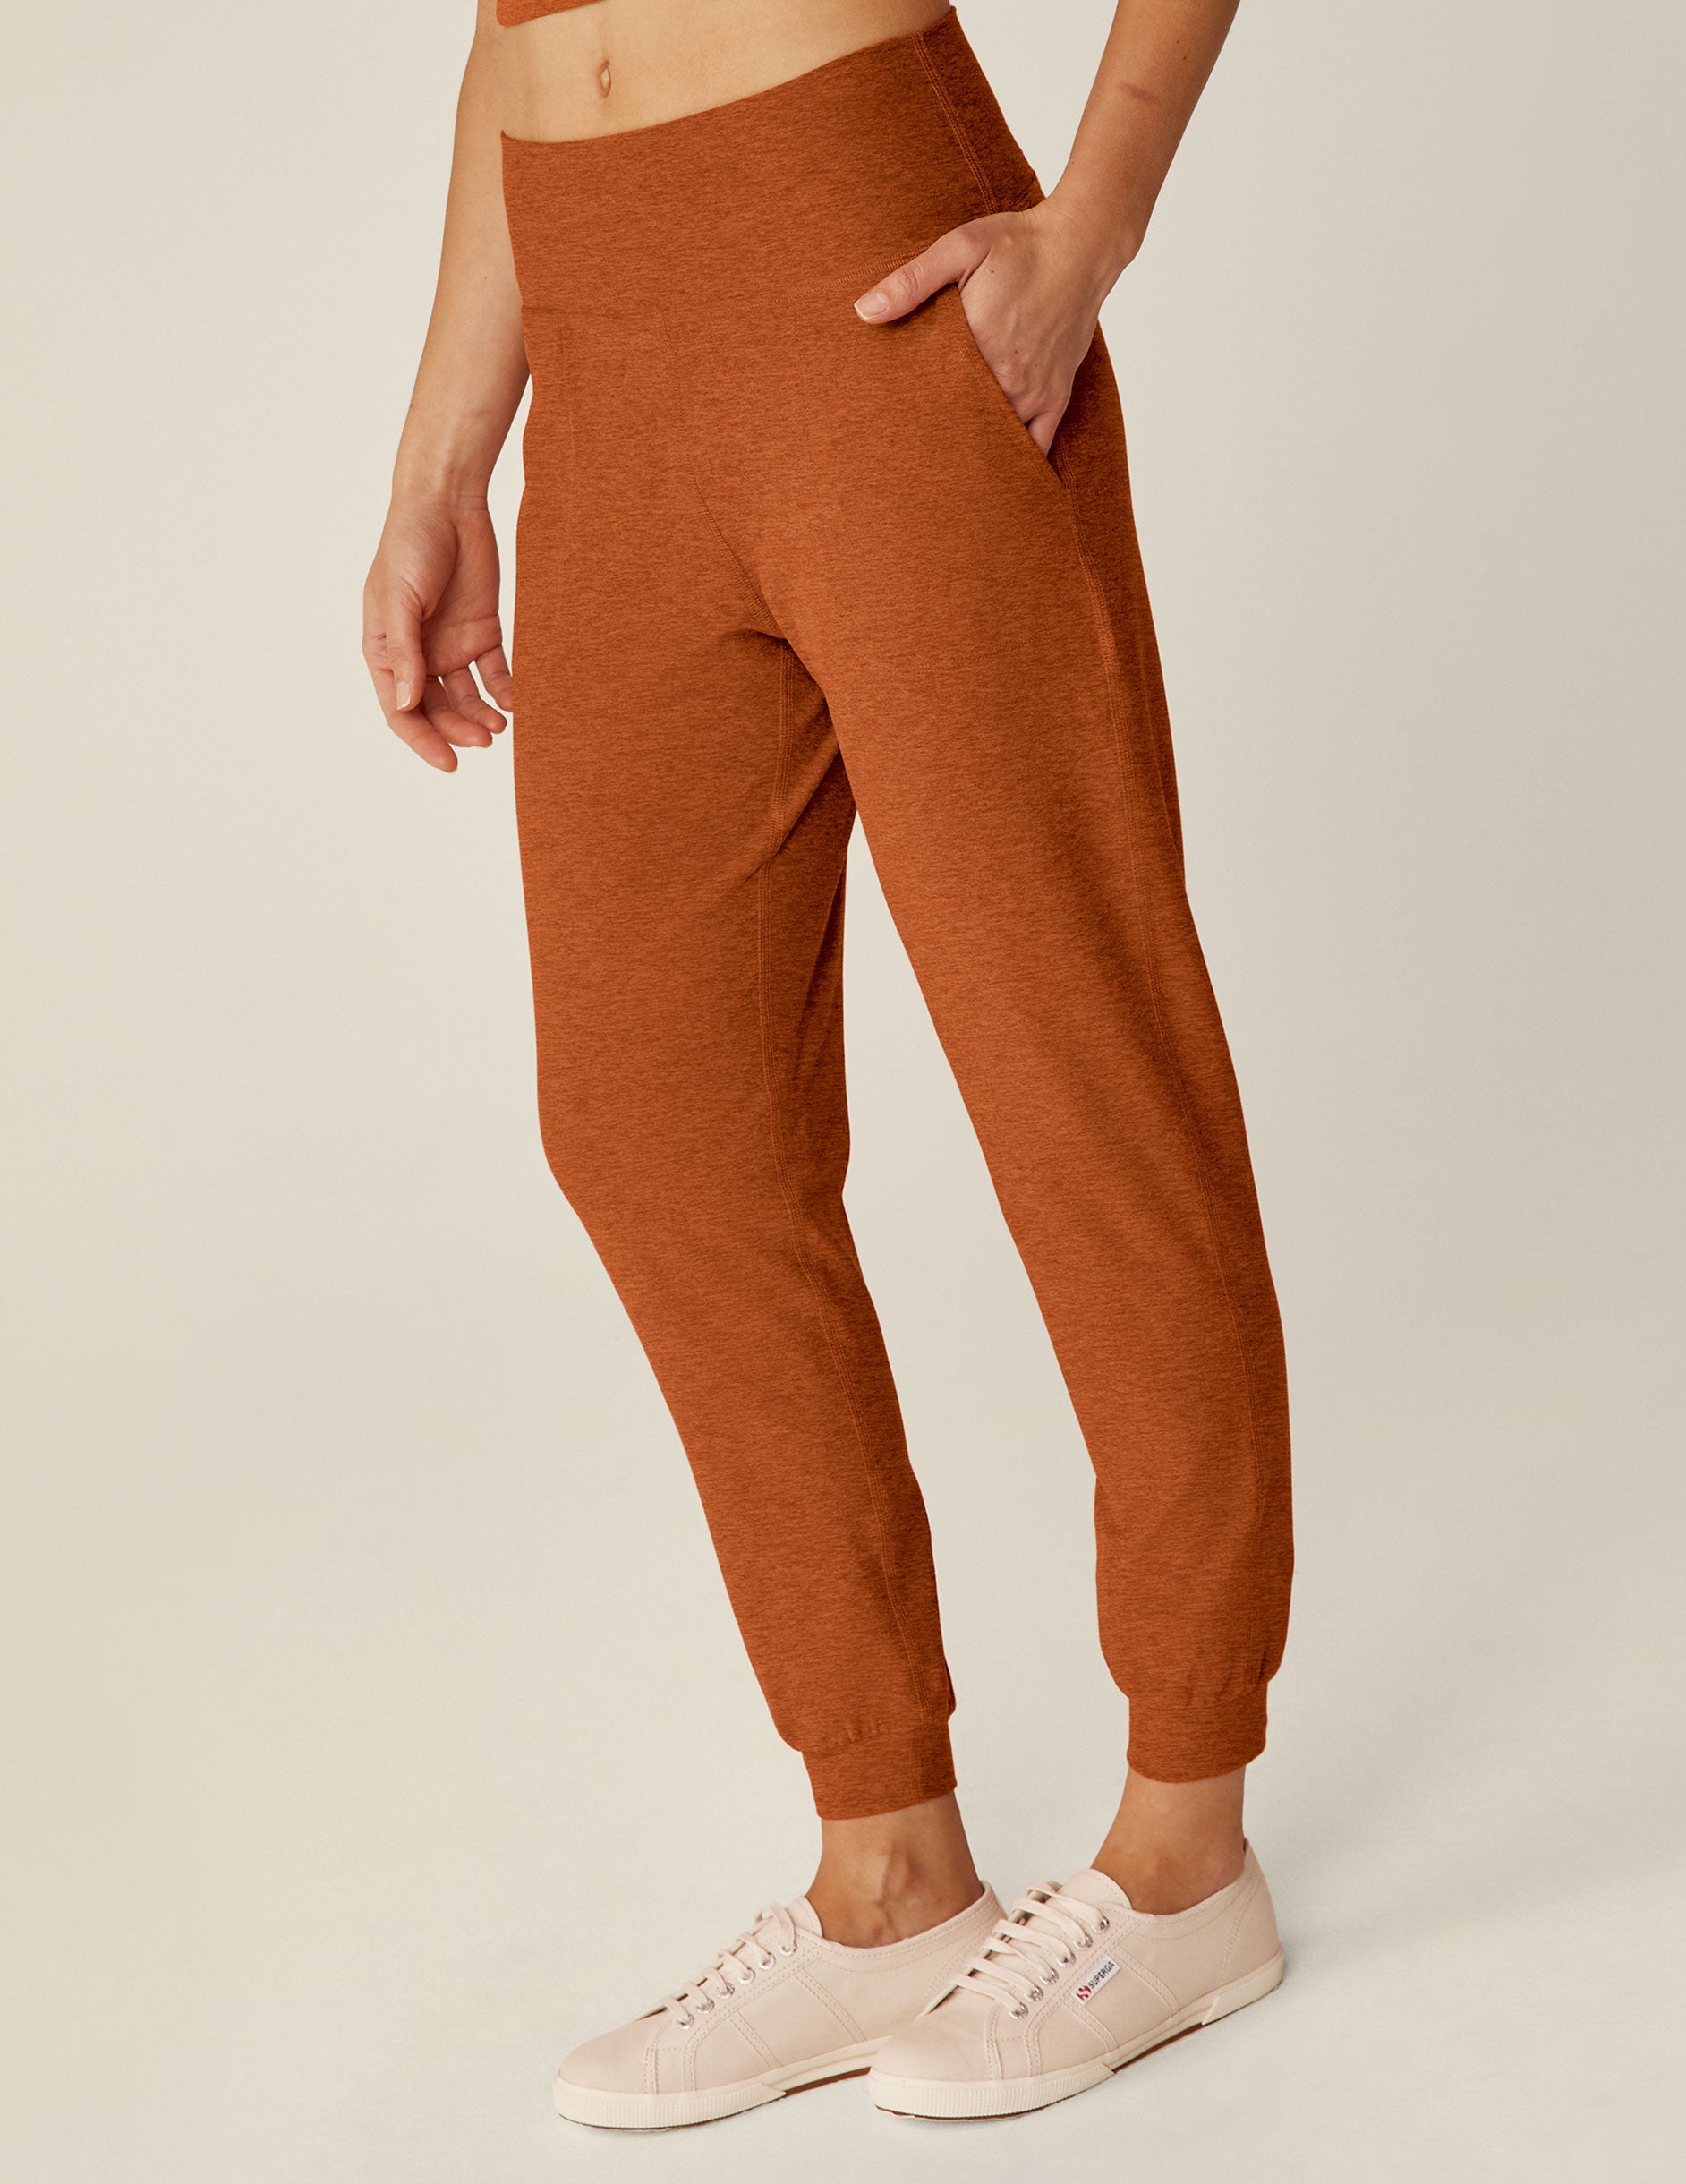 brown high-waisted jogger pants with pockets. 